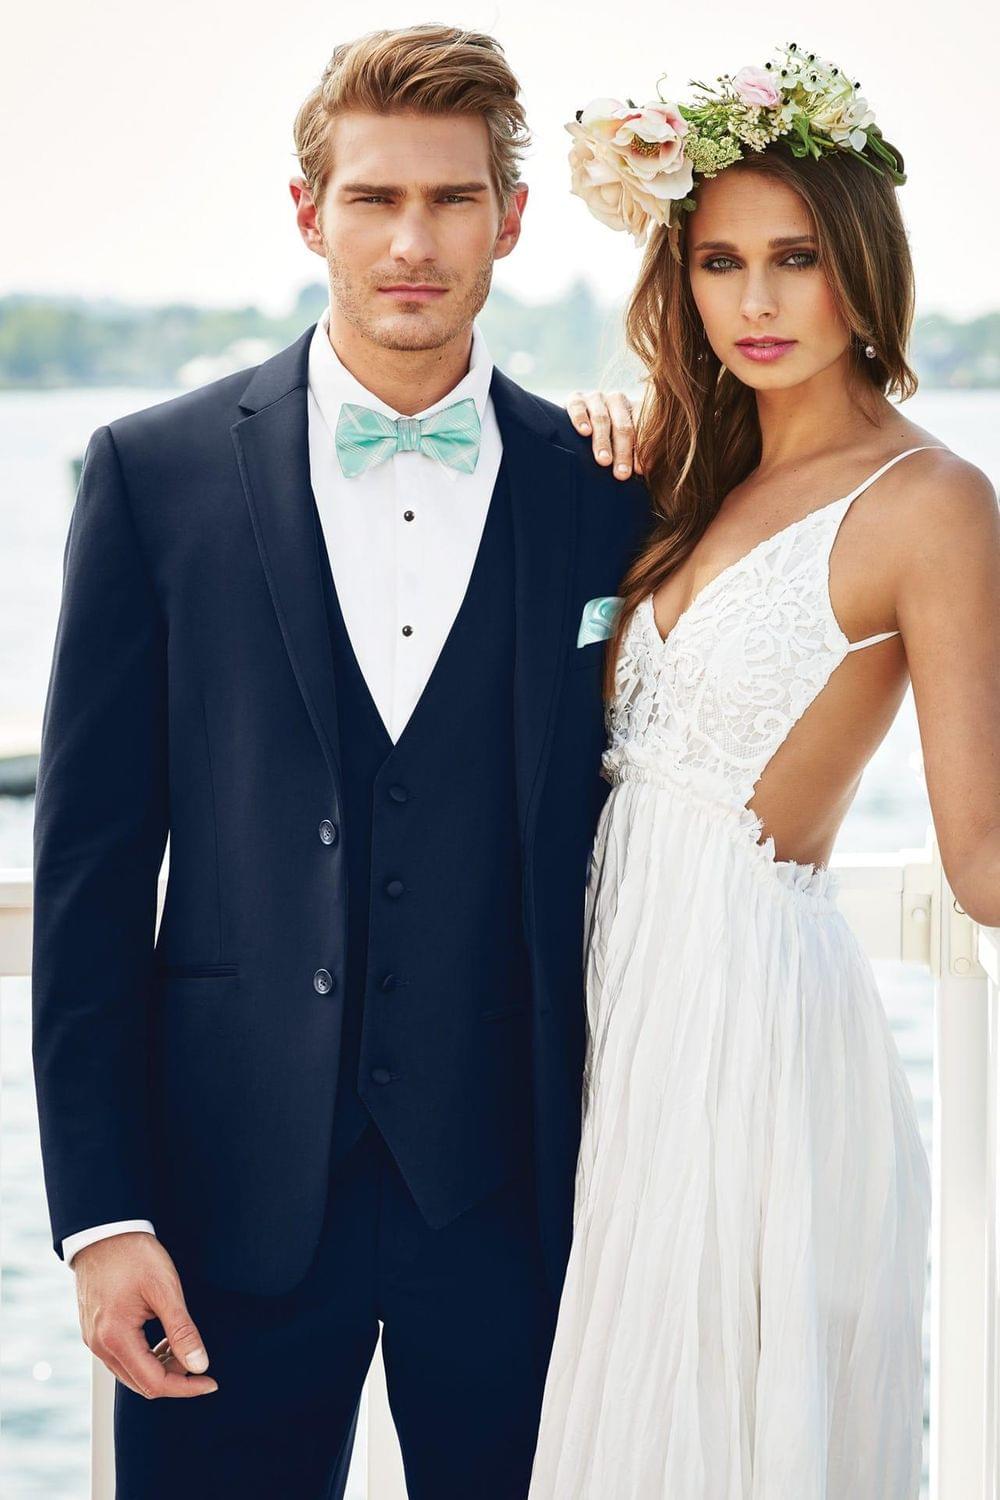 Navy Sterling Wedding Suit designed by Michael Kors is